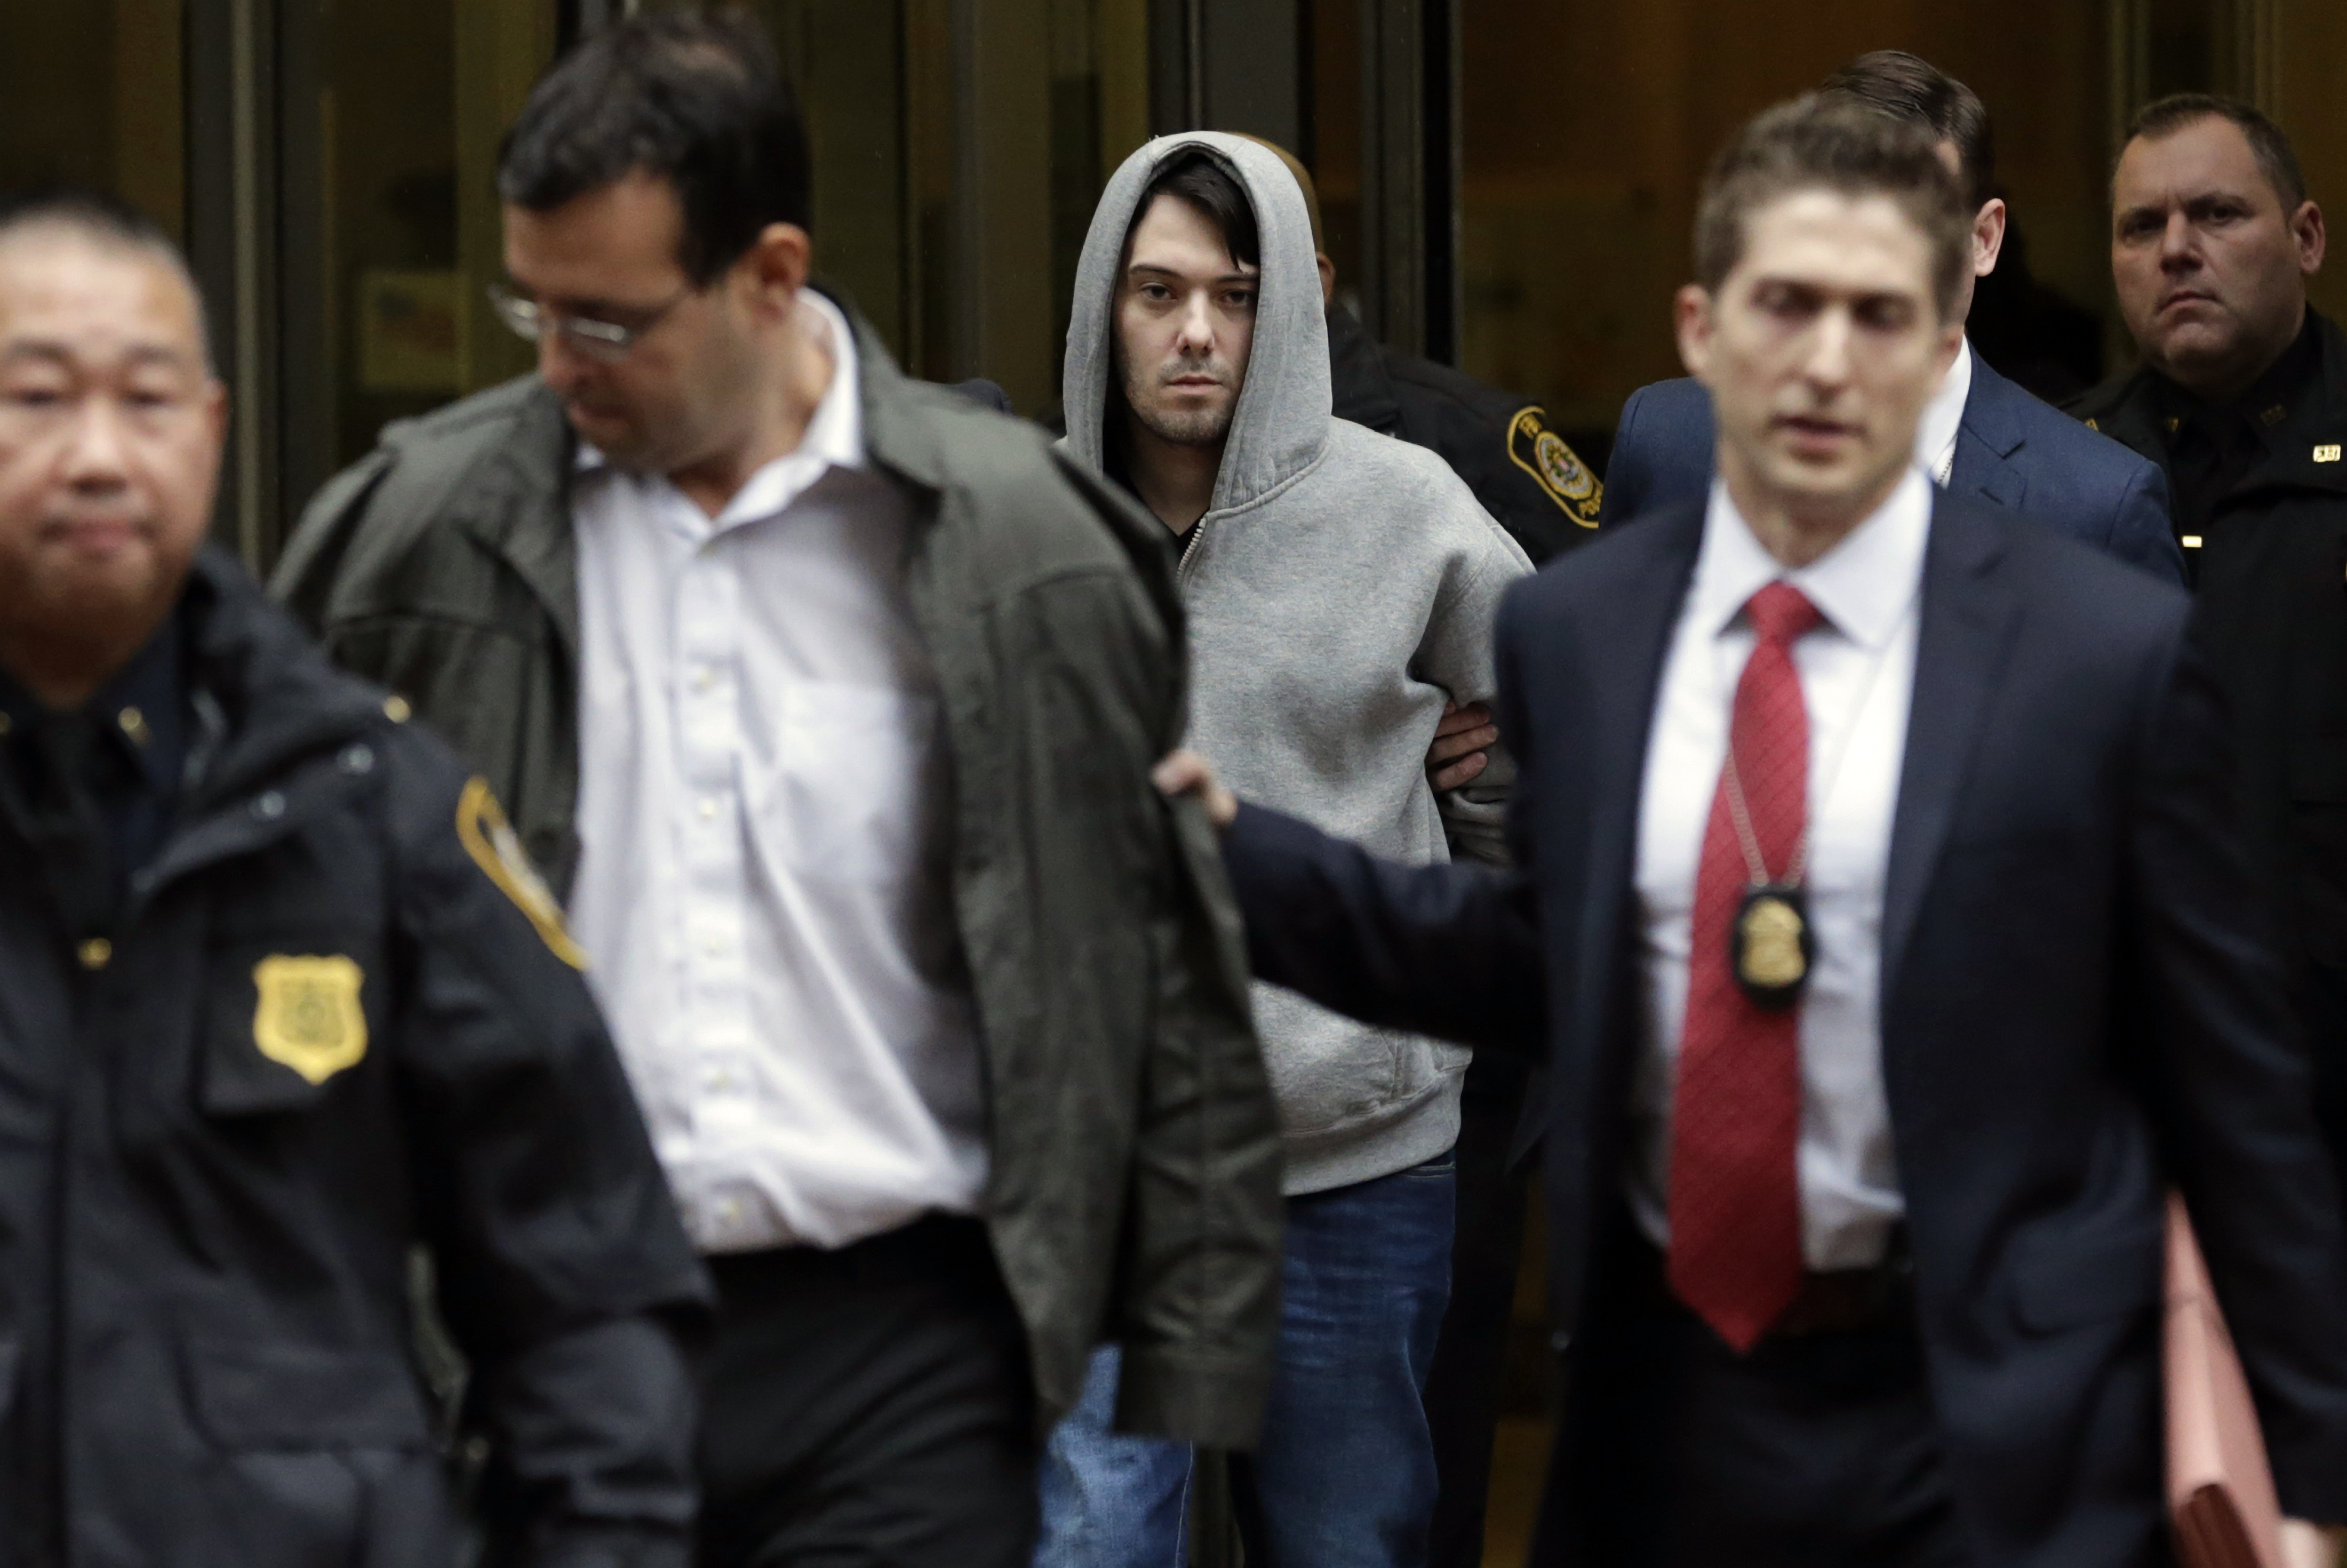 Martin Shkreli, chief executive officer of Turing Pharmaceuticals LLC, center, and attorney Evan Greebel, left, exit federal court in New York, U.S., on Thursday, Dec. 17, 2015. (Peter Foley—Bloomberg via Getty Images)